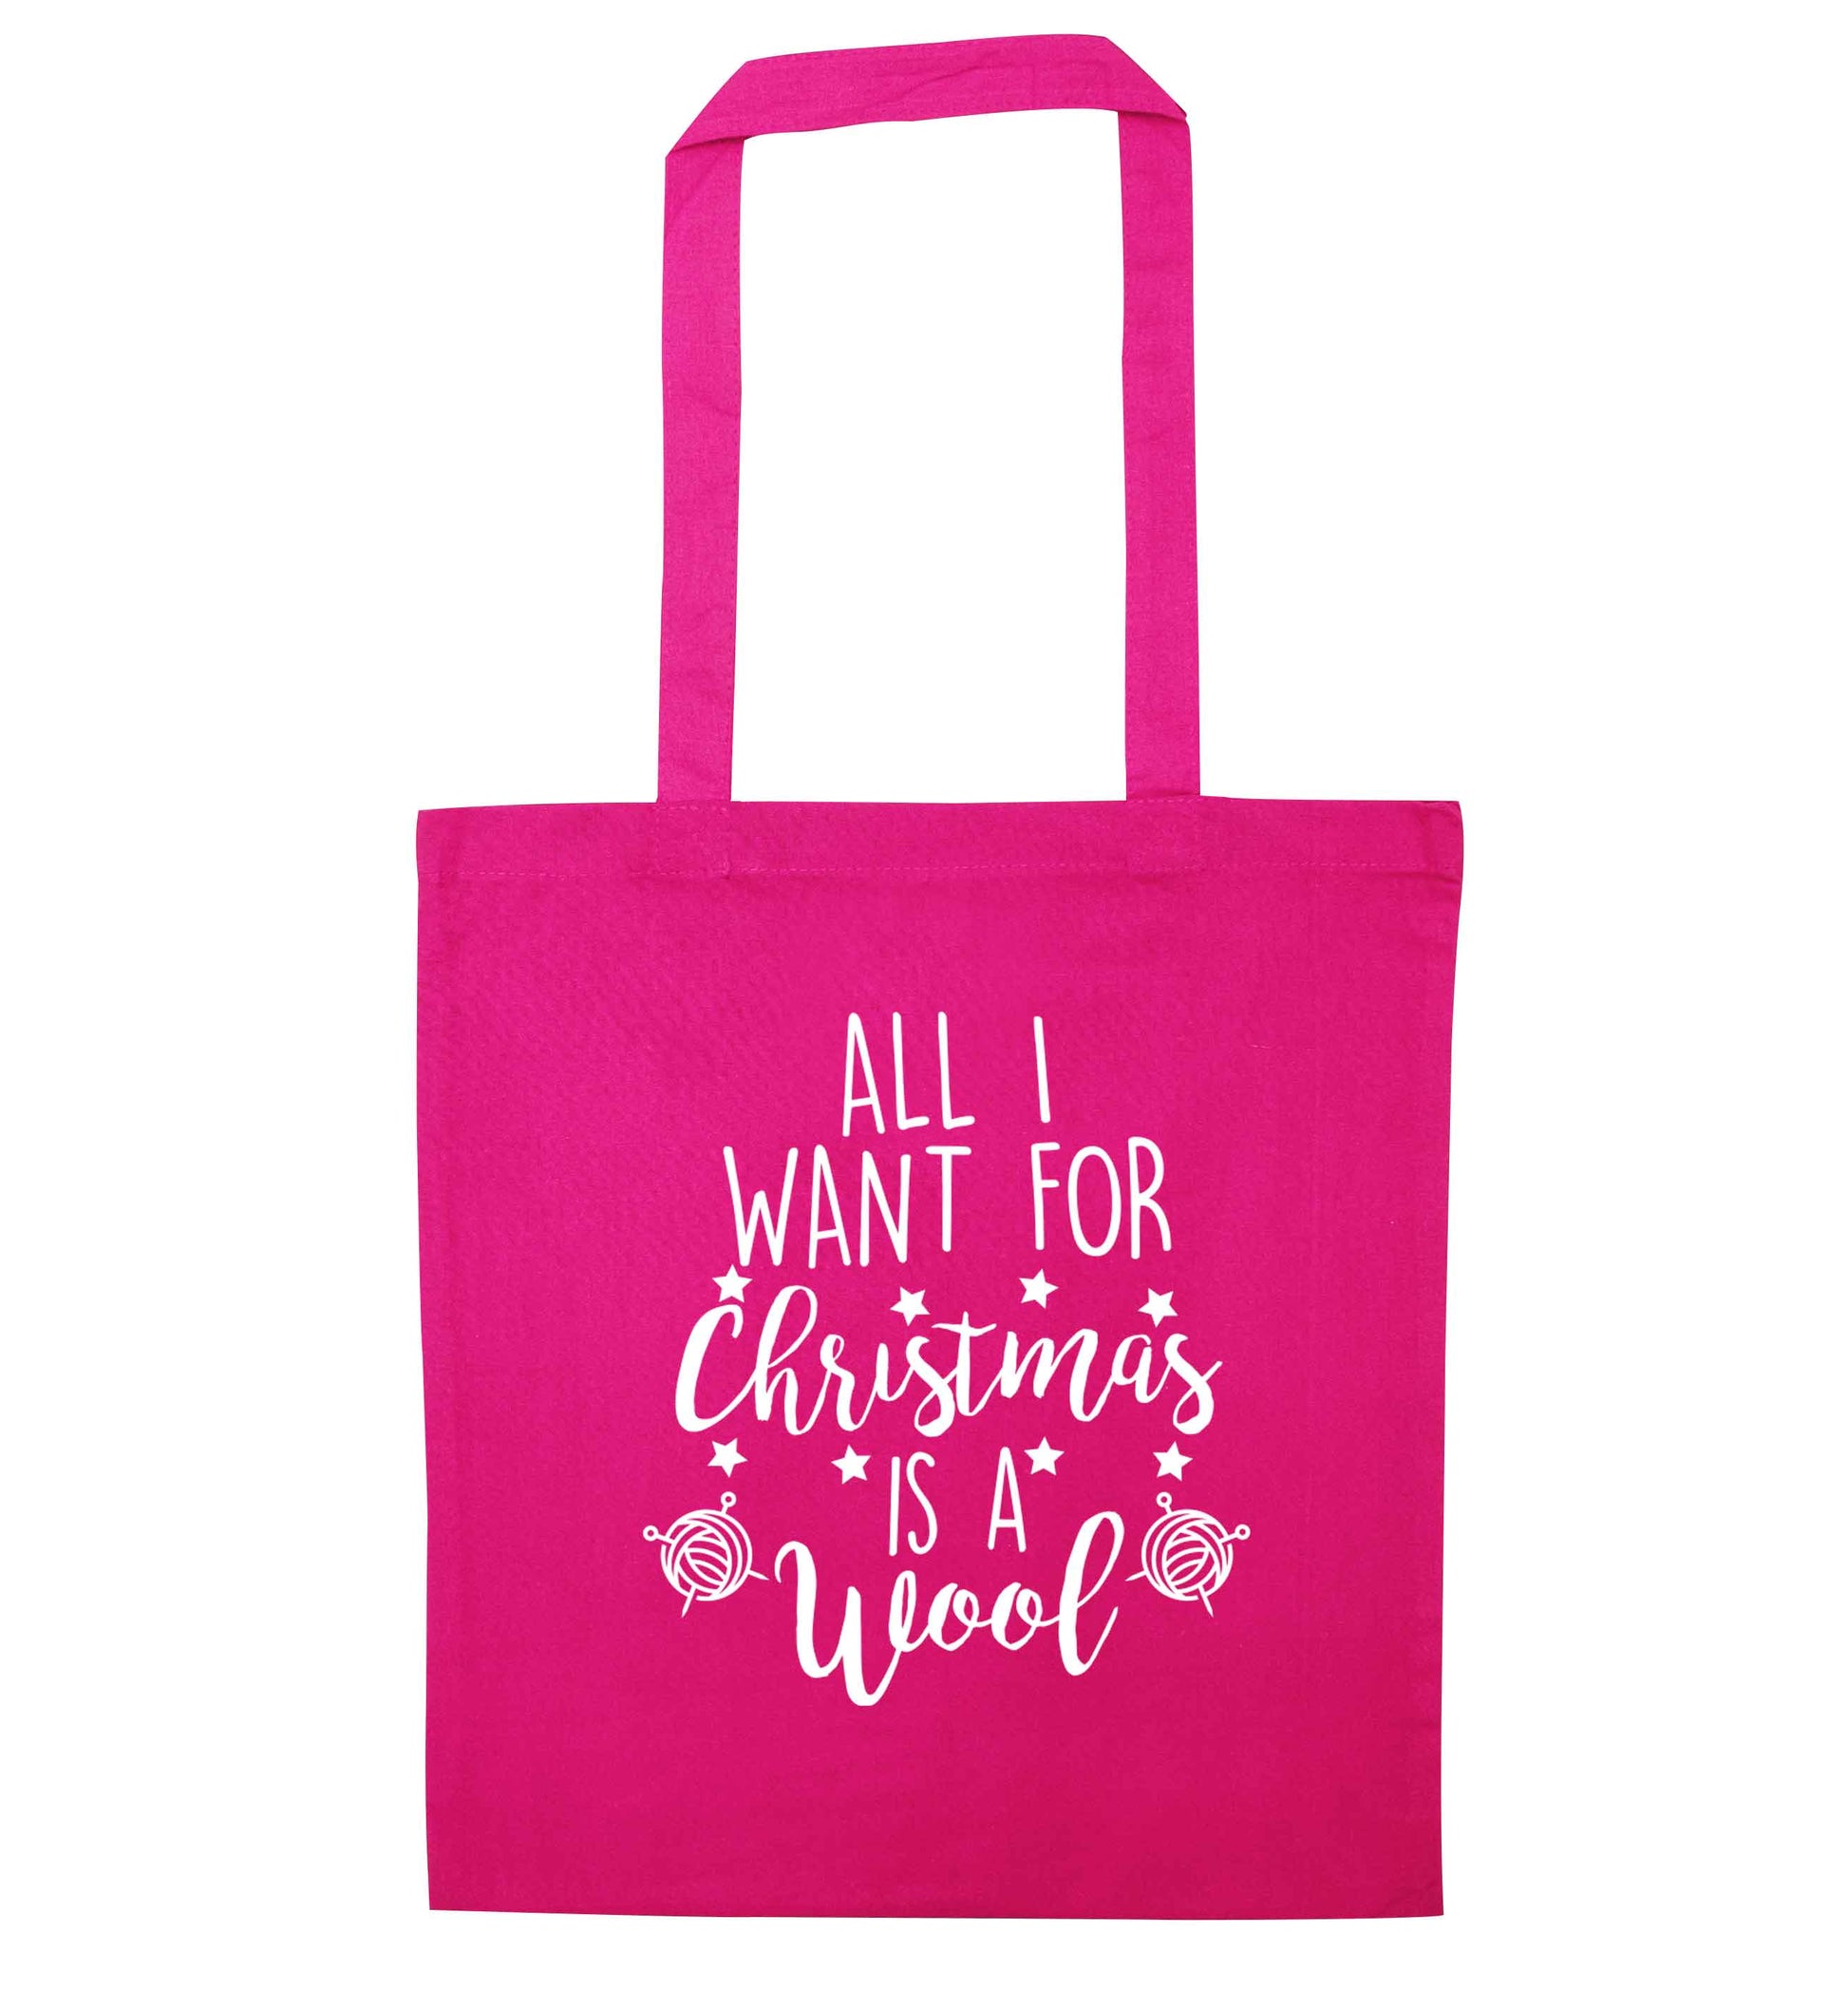 All I want for Christmas is wool! pink tote bag